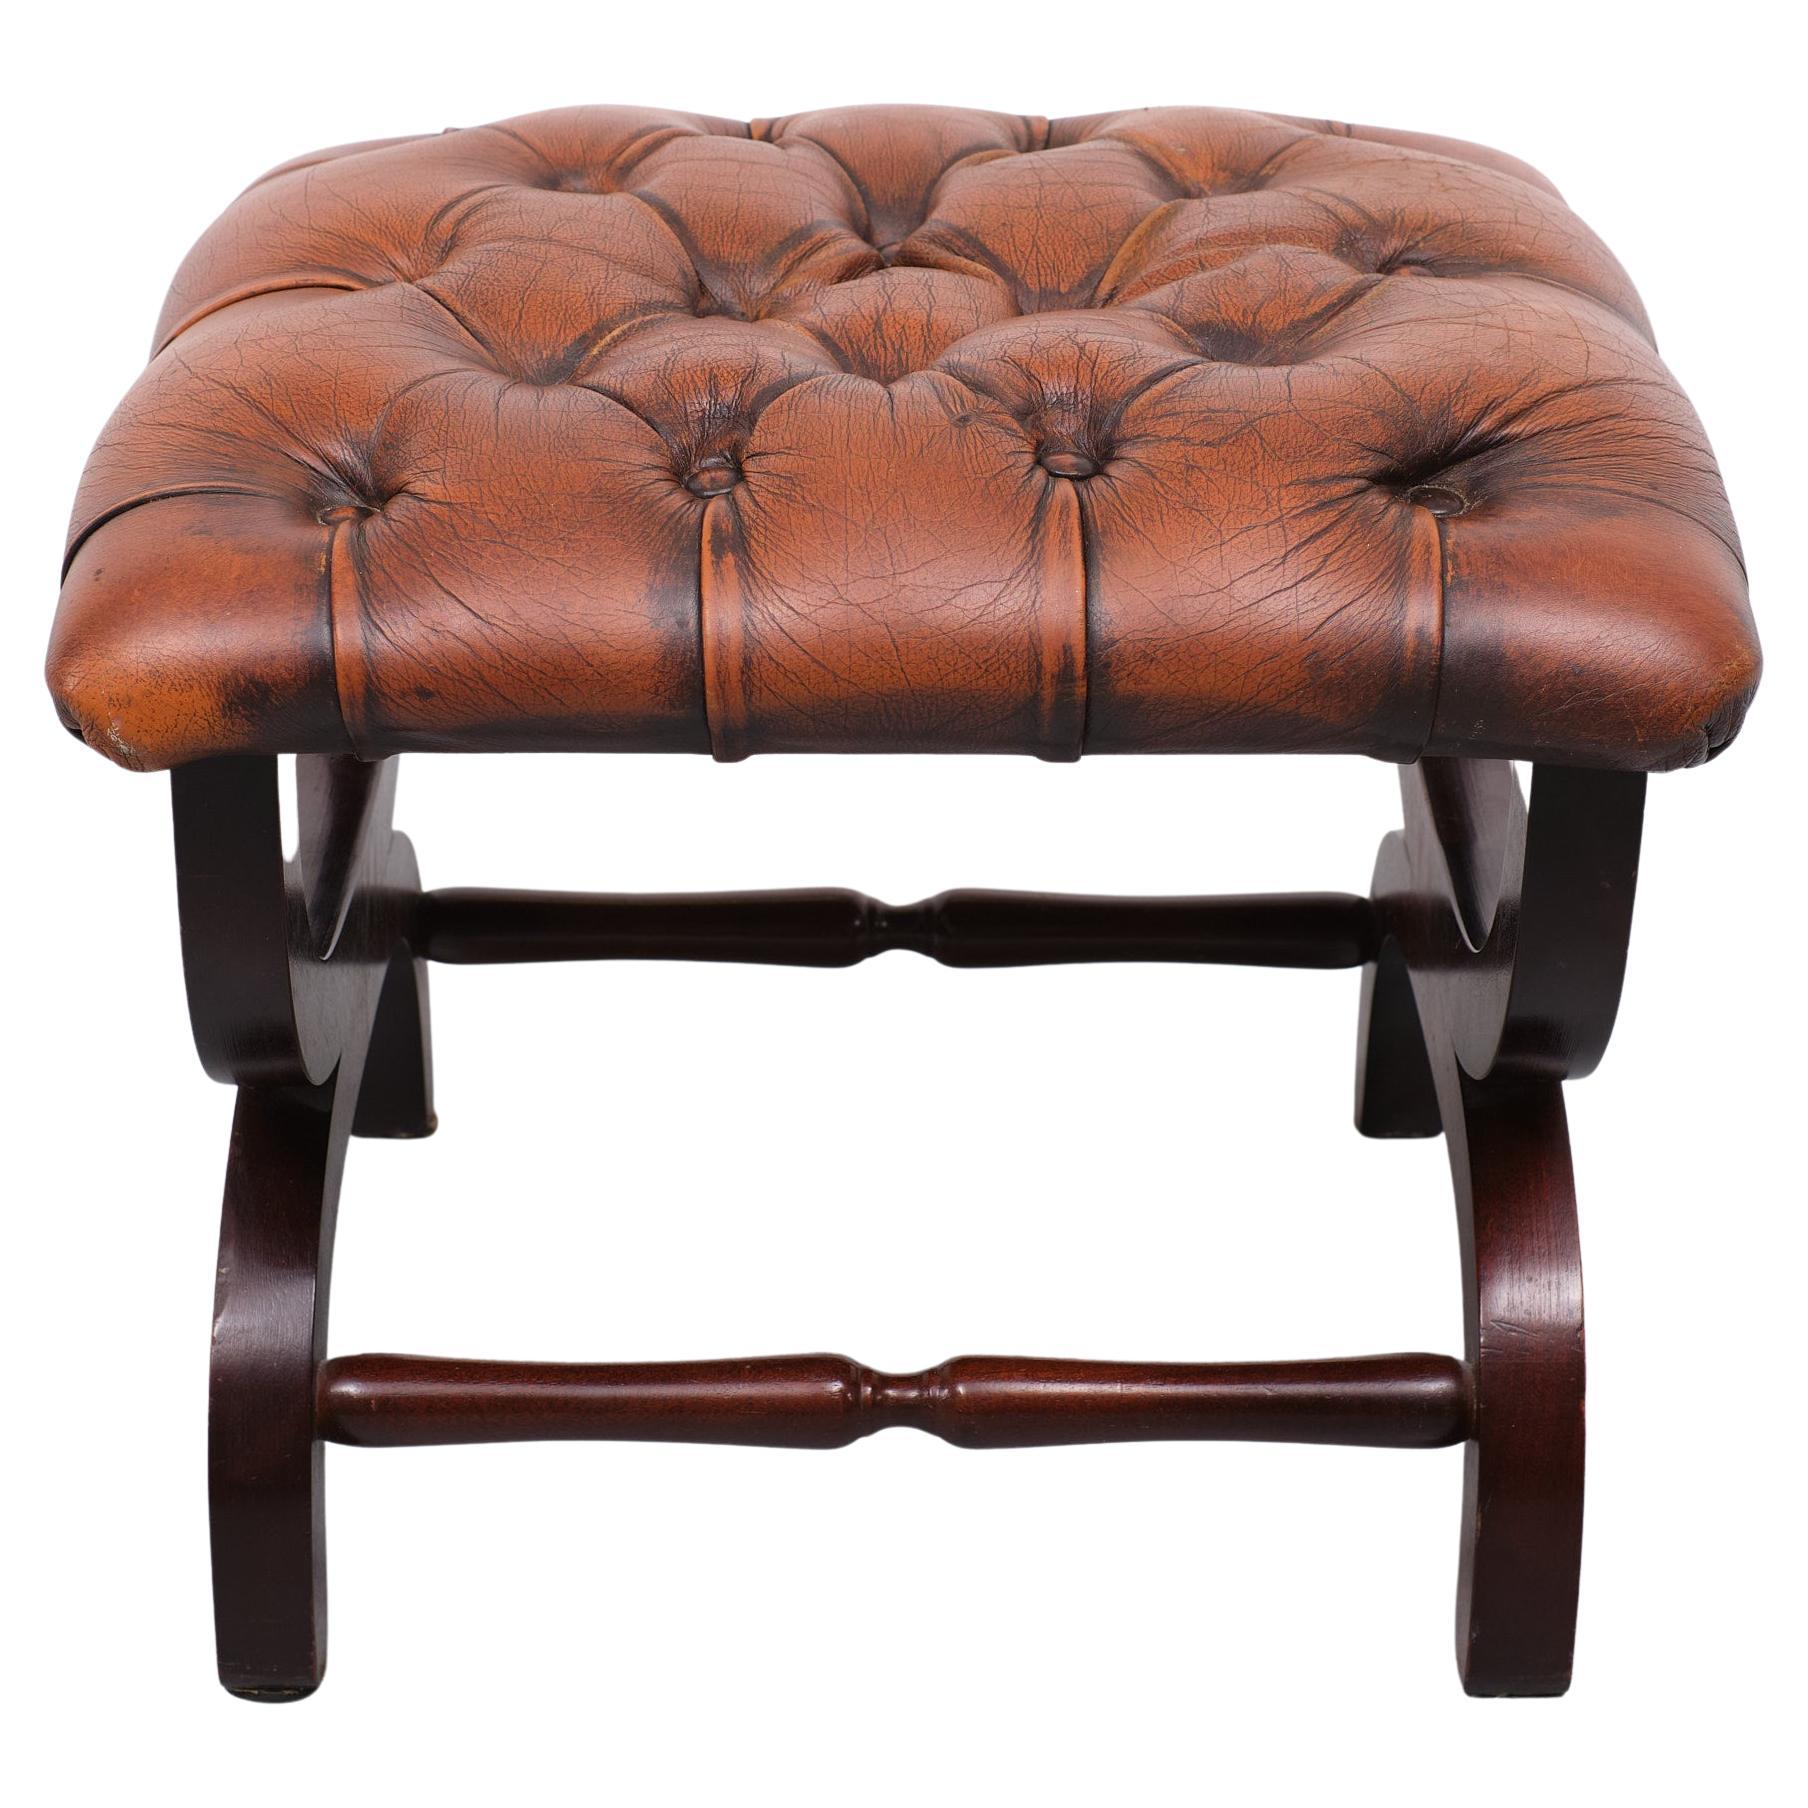 English Country House Style Padded Leather Ottoman For Sale